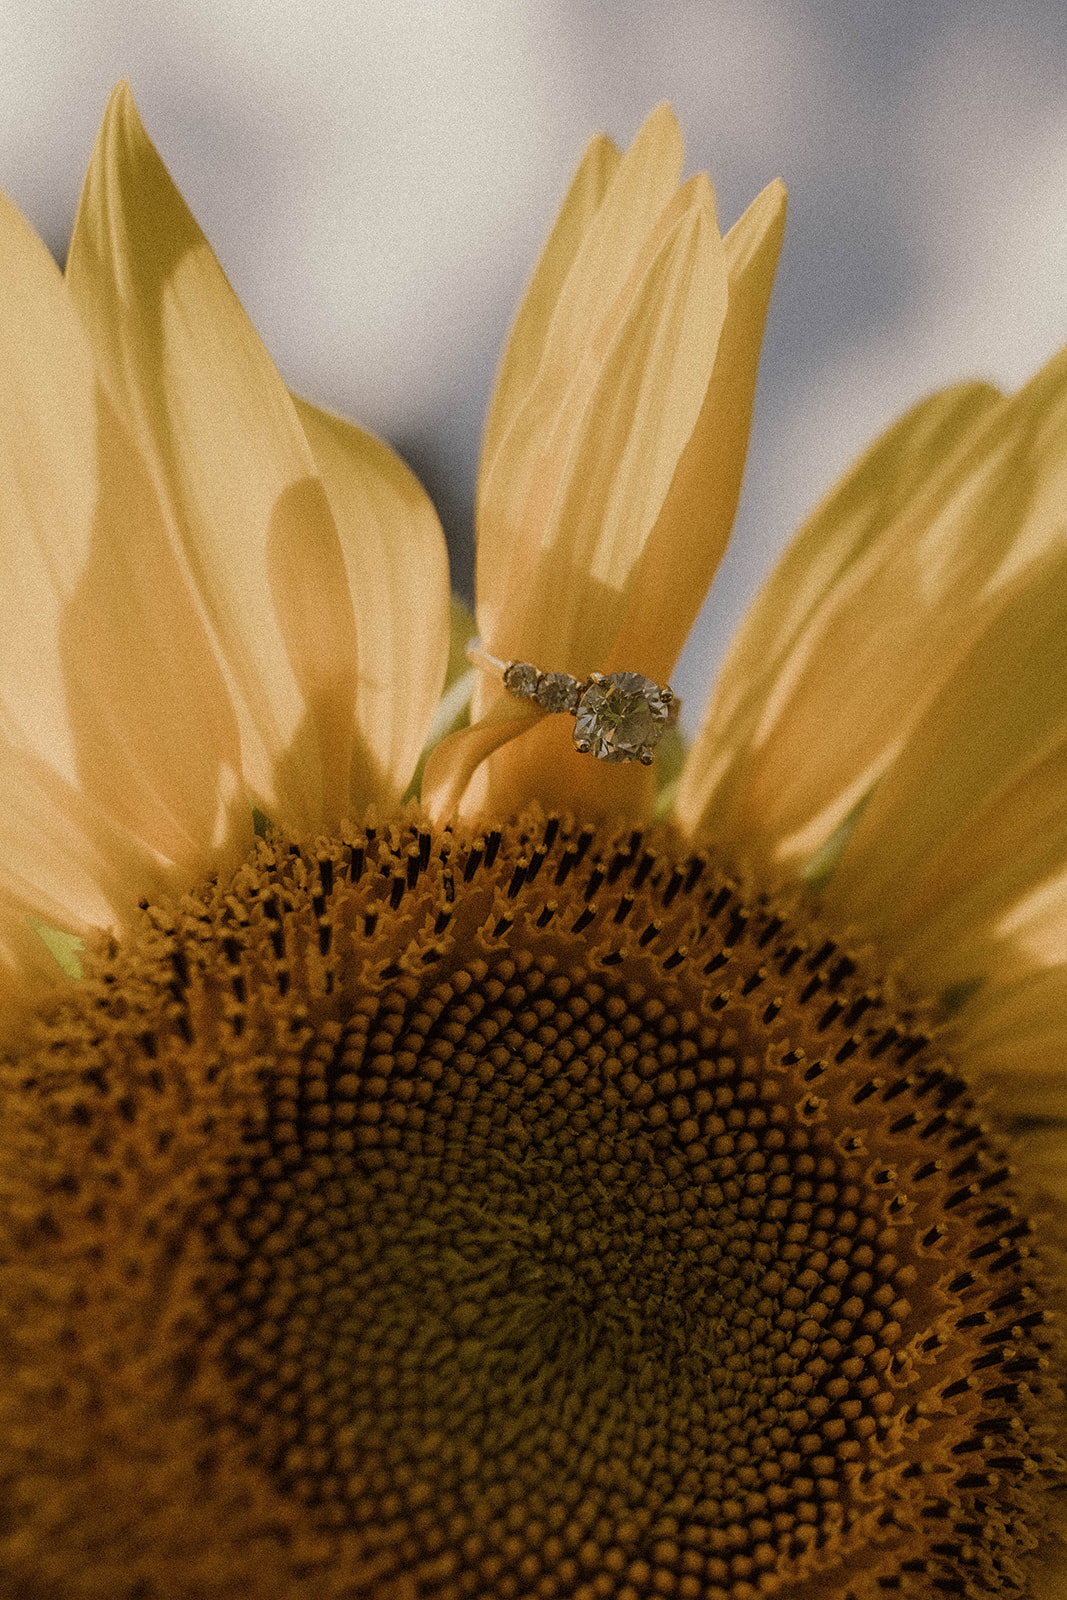 Elegant engagement ring placed carefully on a sunflower for a photoshoto.